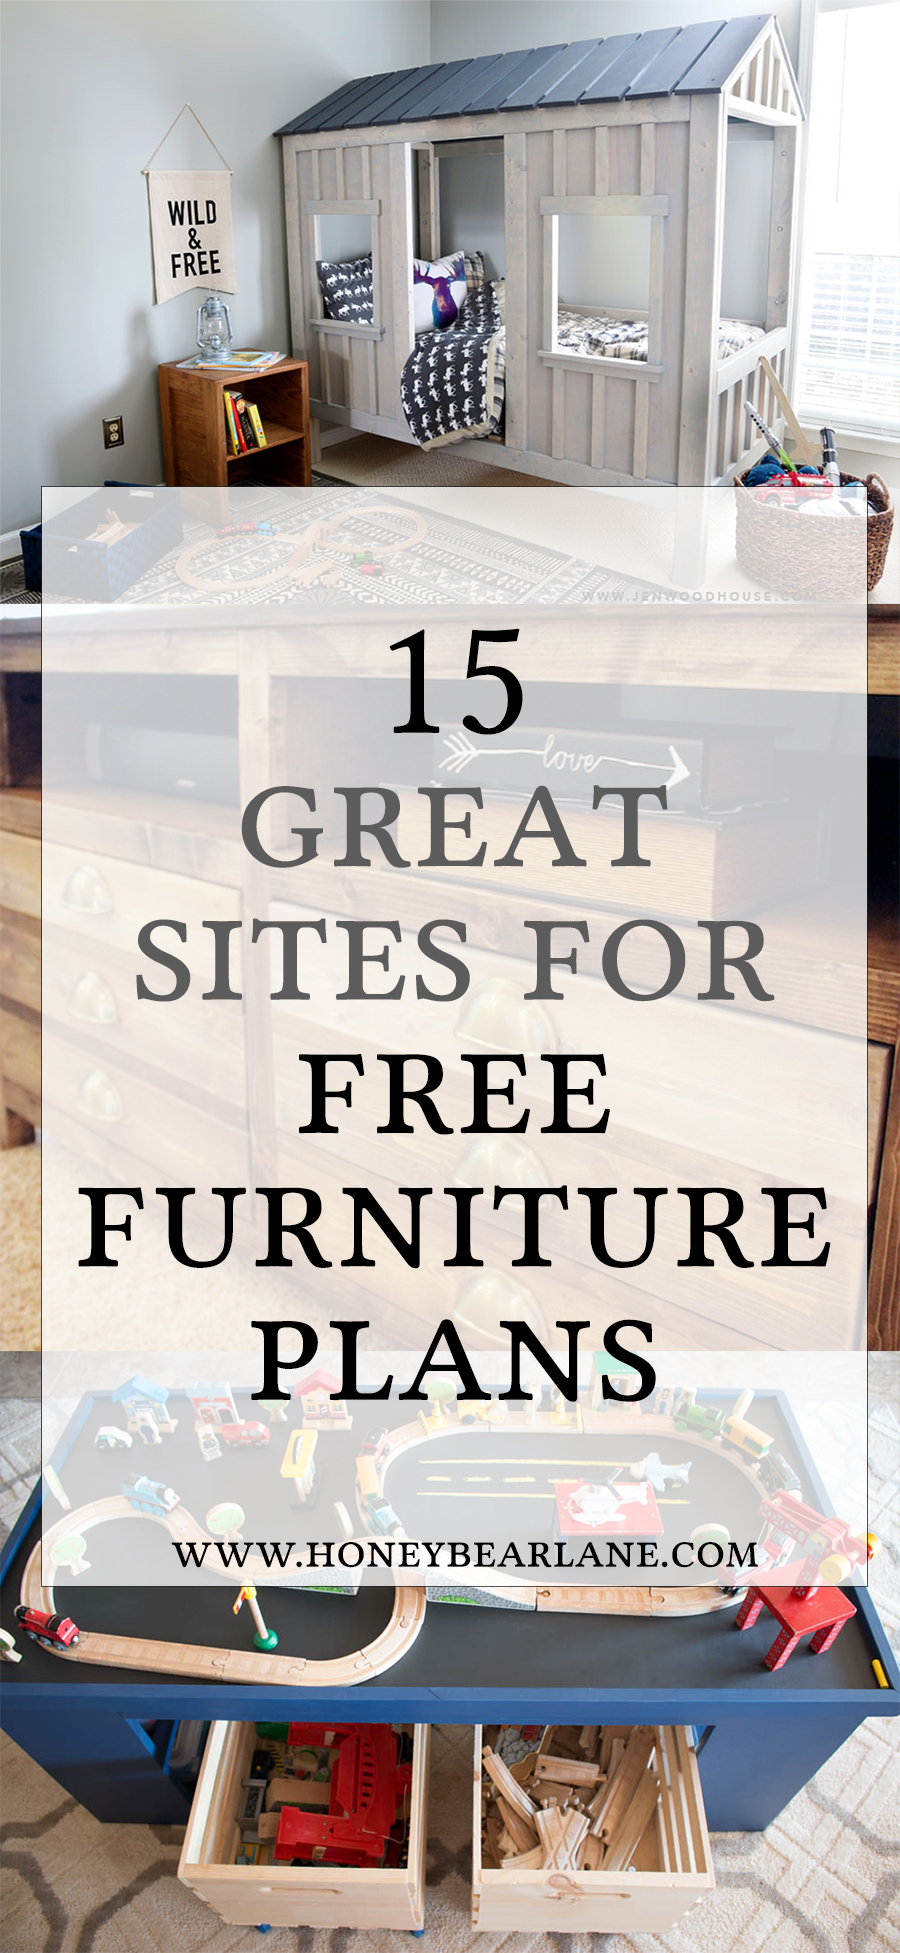 15 Awesome Sites for Free Furniture Building Plans ...